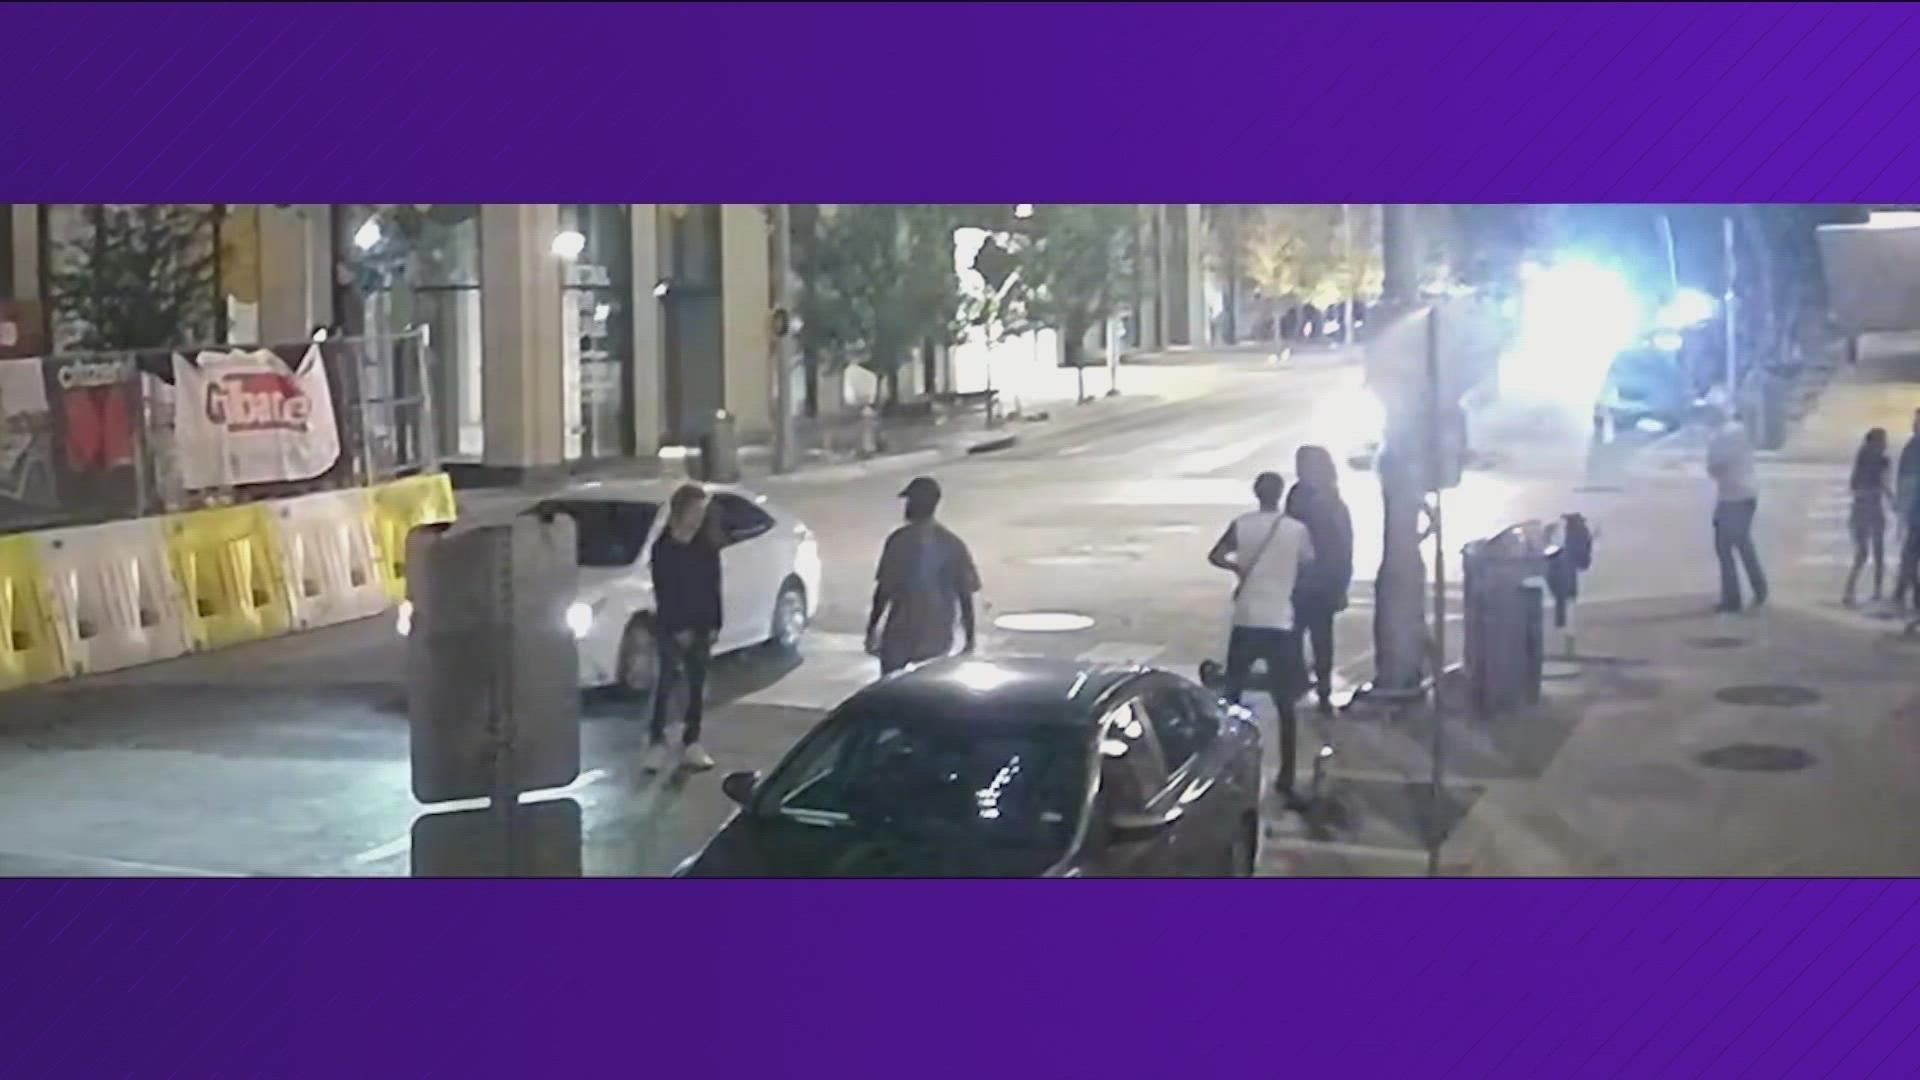 Austin police have released new video that investigators hope will help them identify a person wanted for killing a man in Downtown Austin over the weekend.